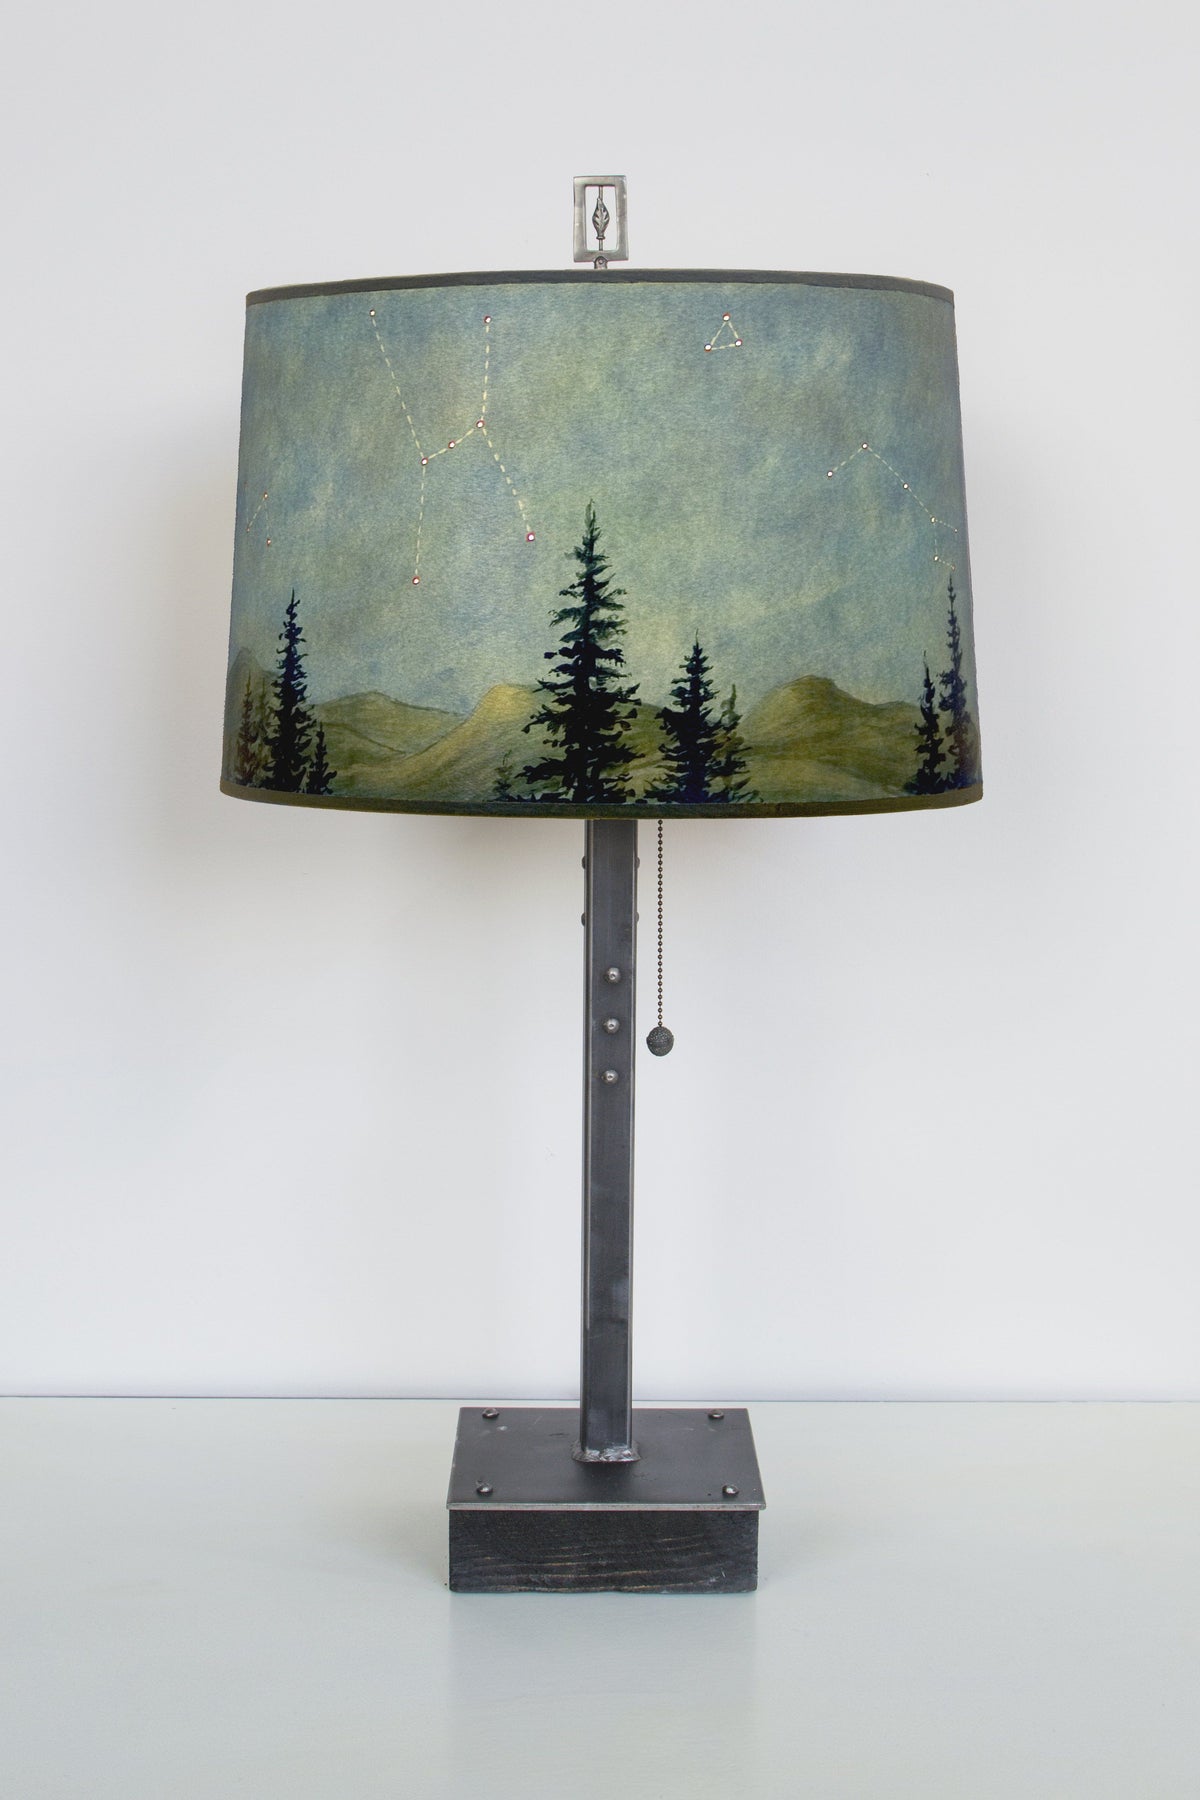 Janna Ugone &amp; Co Table Lamps Steel Table Lamp on Wood with Large Drum Shade in Midnight Sky